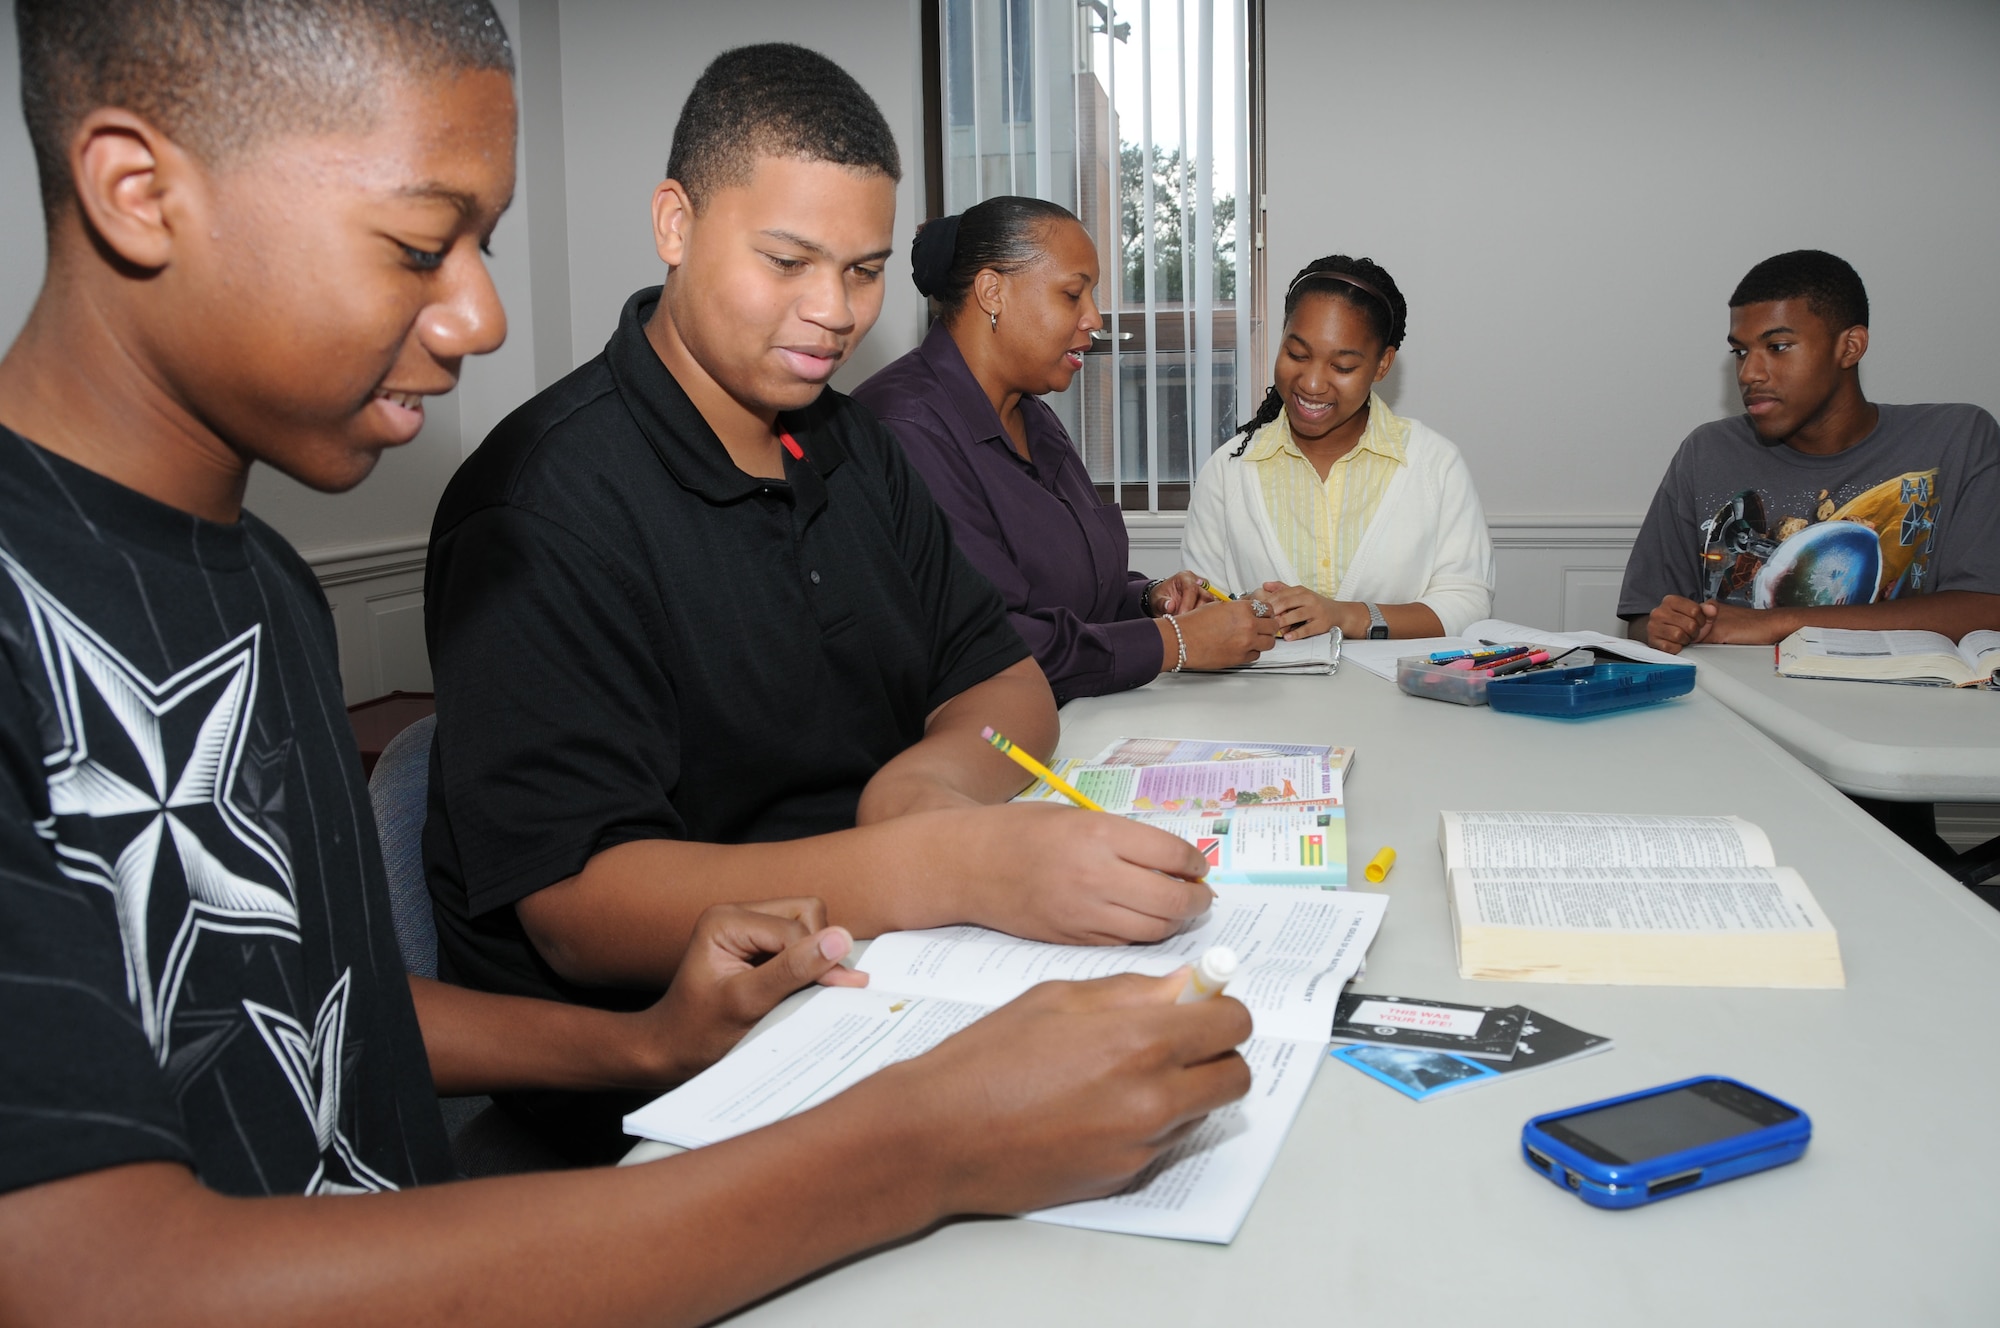 The Elliotts, from left, are William, 15; Chris, 16; Mrs. Cherie Elliott; Sydney, 13; and Ralph, 17. With mom’s help, William, Chris and Sydney review lessons prior to the start of the new school year while Ralph does some leisure reading. This home schooling session was held at the Triangle Annex because Mrs. Elliott had a gospel service leaders meeting there.  Cherie Elliott is married to Chaplain (Capt.) Ralph Elliott, who’s currently deployed.  (U.S. Air Force photo by Kemberly Groue)